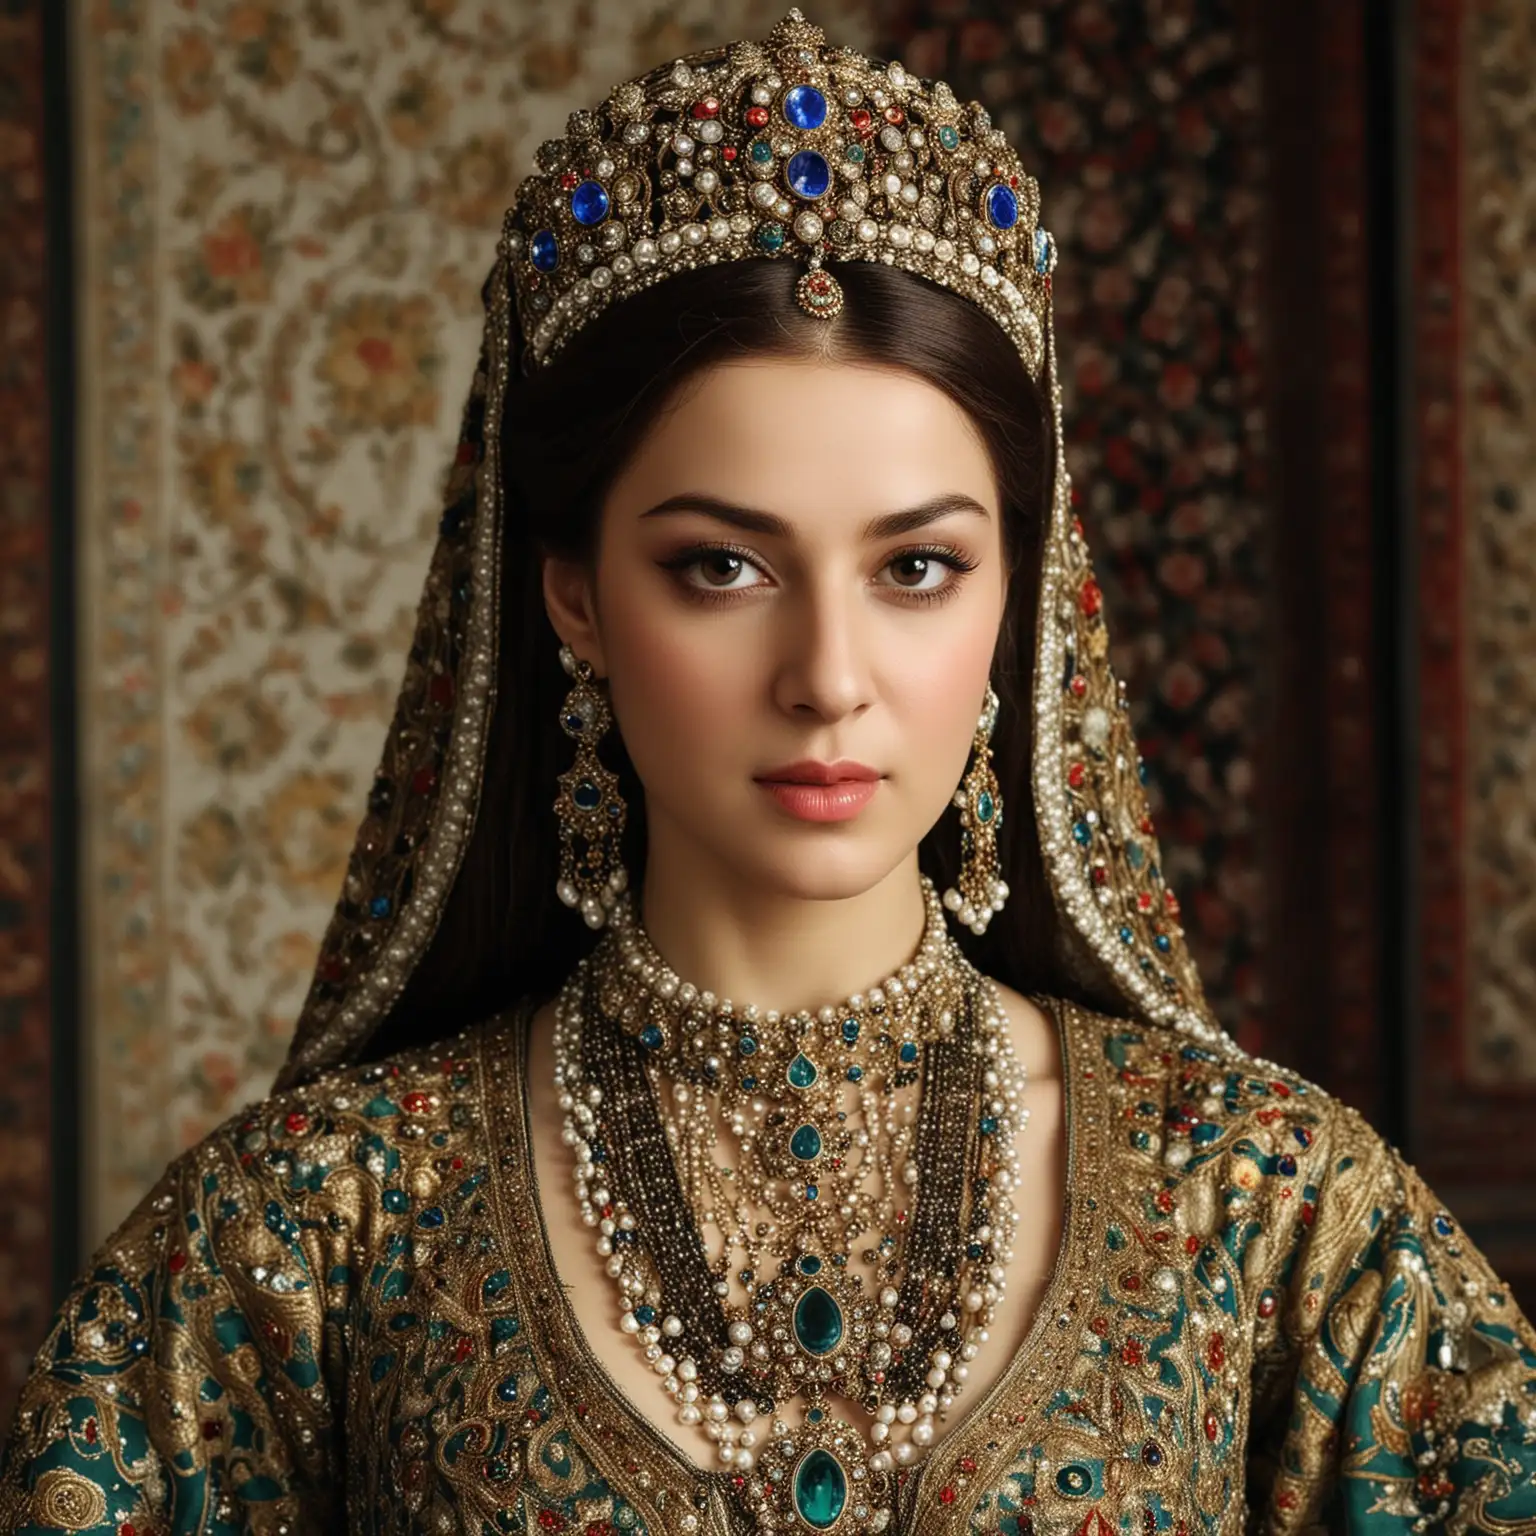 Kösem Sultan, one of the most influential women in Ottoman history, is depicted as a figure of power and sophistication. Her appearance reflects her status as a prominent figure in the Ottoman court:

Face: Kösem Sultan's face is often described as regal and commanding, with sharp features that exude authority and intelligence. Her eyes are typically depicted as piercing and expressive, conveying a sense of strength and determination. Despite the challenges she faces, Kösem Sultan maintains a dignified and composed demeanor, earning the respect and admiration of those around her.

Hair: Kösem Sultan's hair is typically portrayed as dark and lustrous, often styled in elaborate braids or adorned with jewels and accessories befitting her status. Her hair serves as a symbol of her beauty and sophistication, adding to her allure and presence in the court.

Clothing: Kösem Sultan's clothing is lavish and ornate, reflecting her position as a member of the Ottoman royal family. She is often depicted wearing richly embroidered robes, adorned with intricate patterns and embellishments that showcase her wealth and status. Her attire is always meticulously tailored and impeccably styled, emphasizing her elegance and refinement.

Overall, Kösem Sultan's appearance is that of a powerful and formidable figure, whose regal bearing and commanding presence leave a lasting impression on those around her. She is a symbol of strength, resilience, and sophistication, embodying the ideals of Ottoman royalty in both her appearance and her actions.